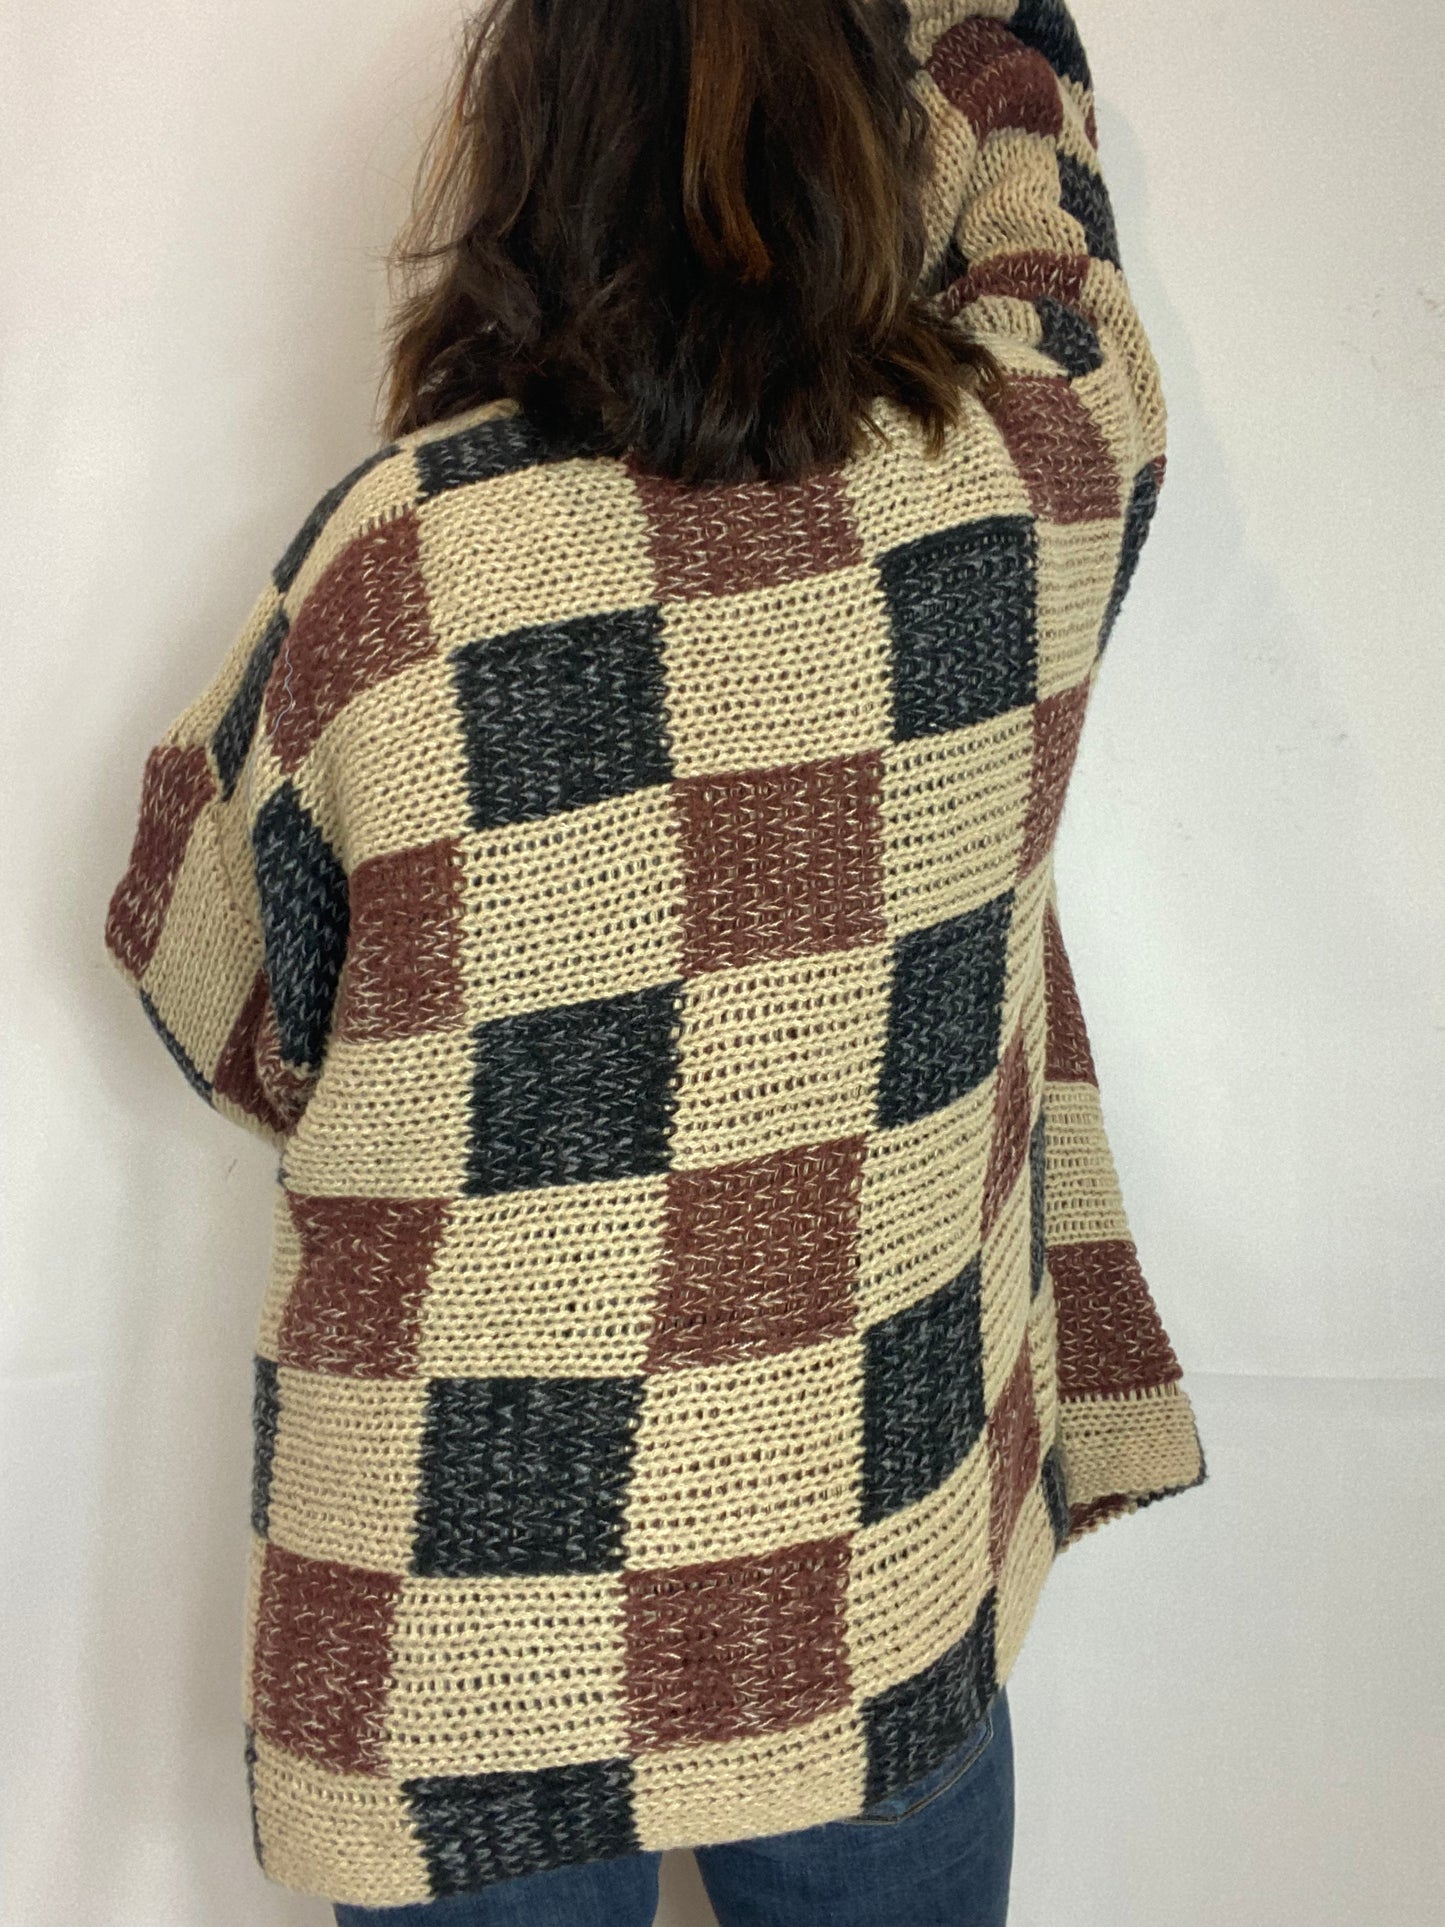 The Chaco Checkered Cardi